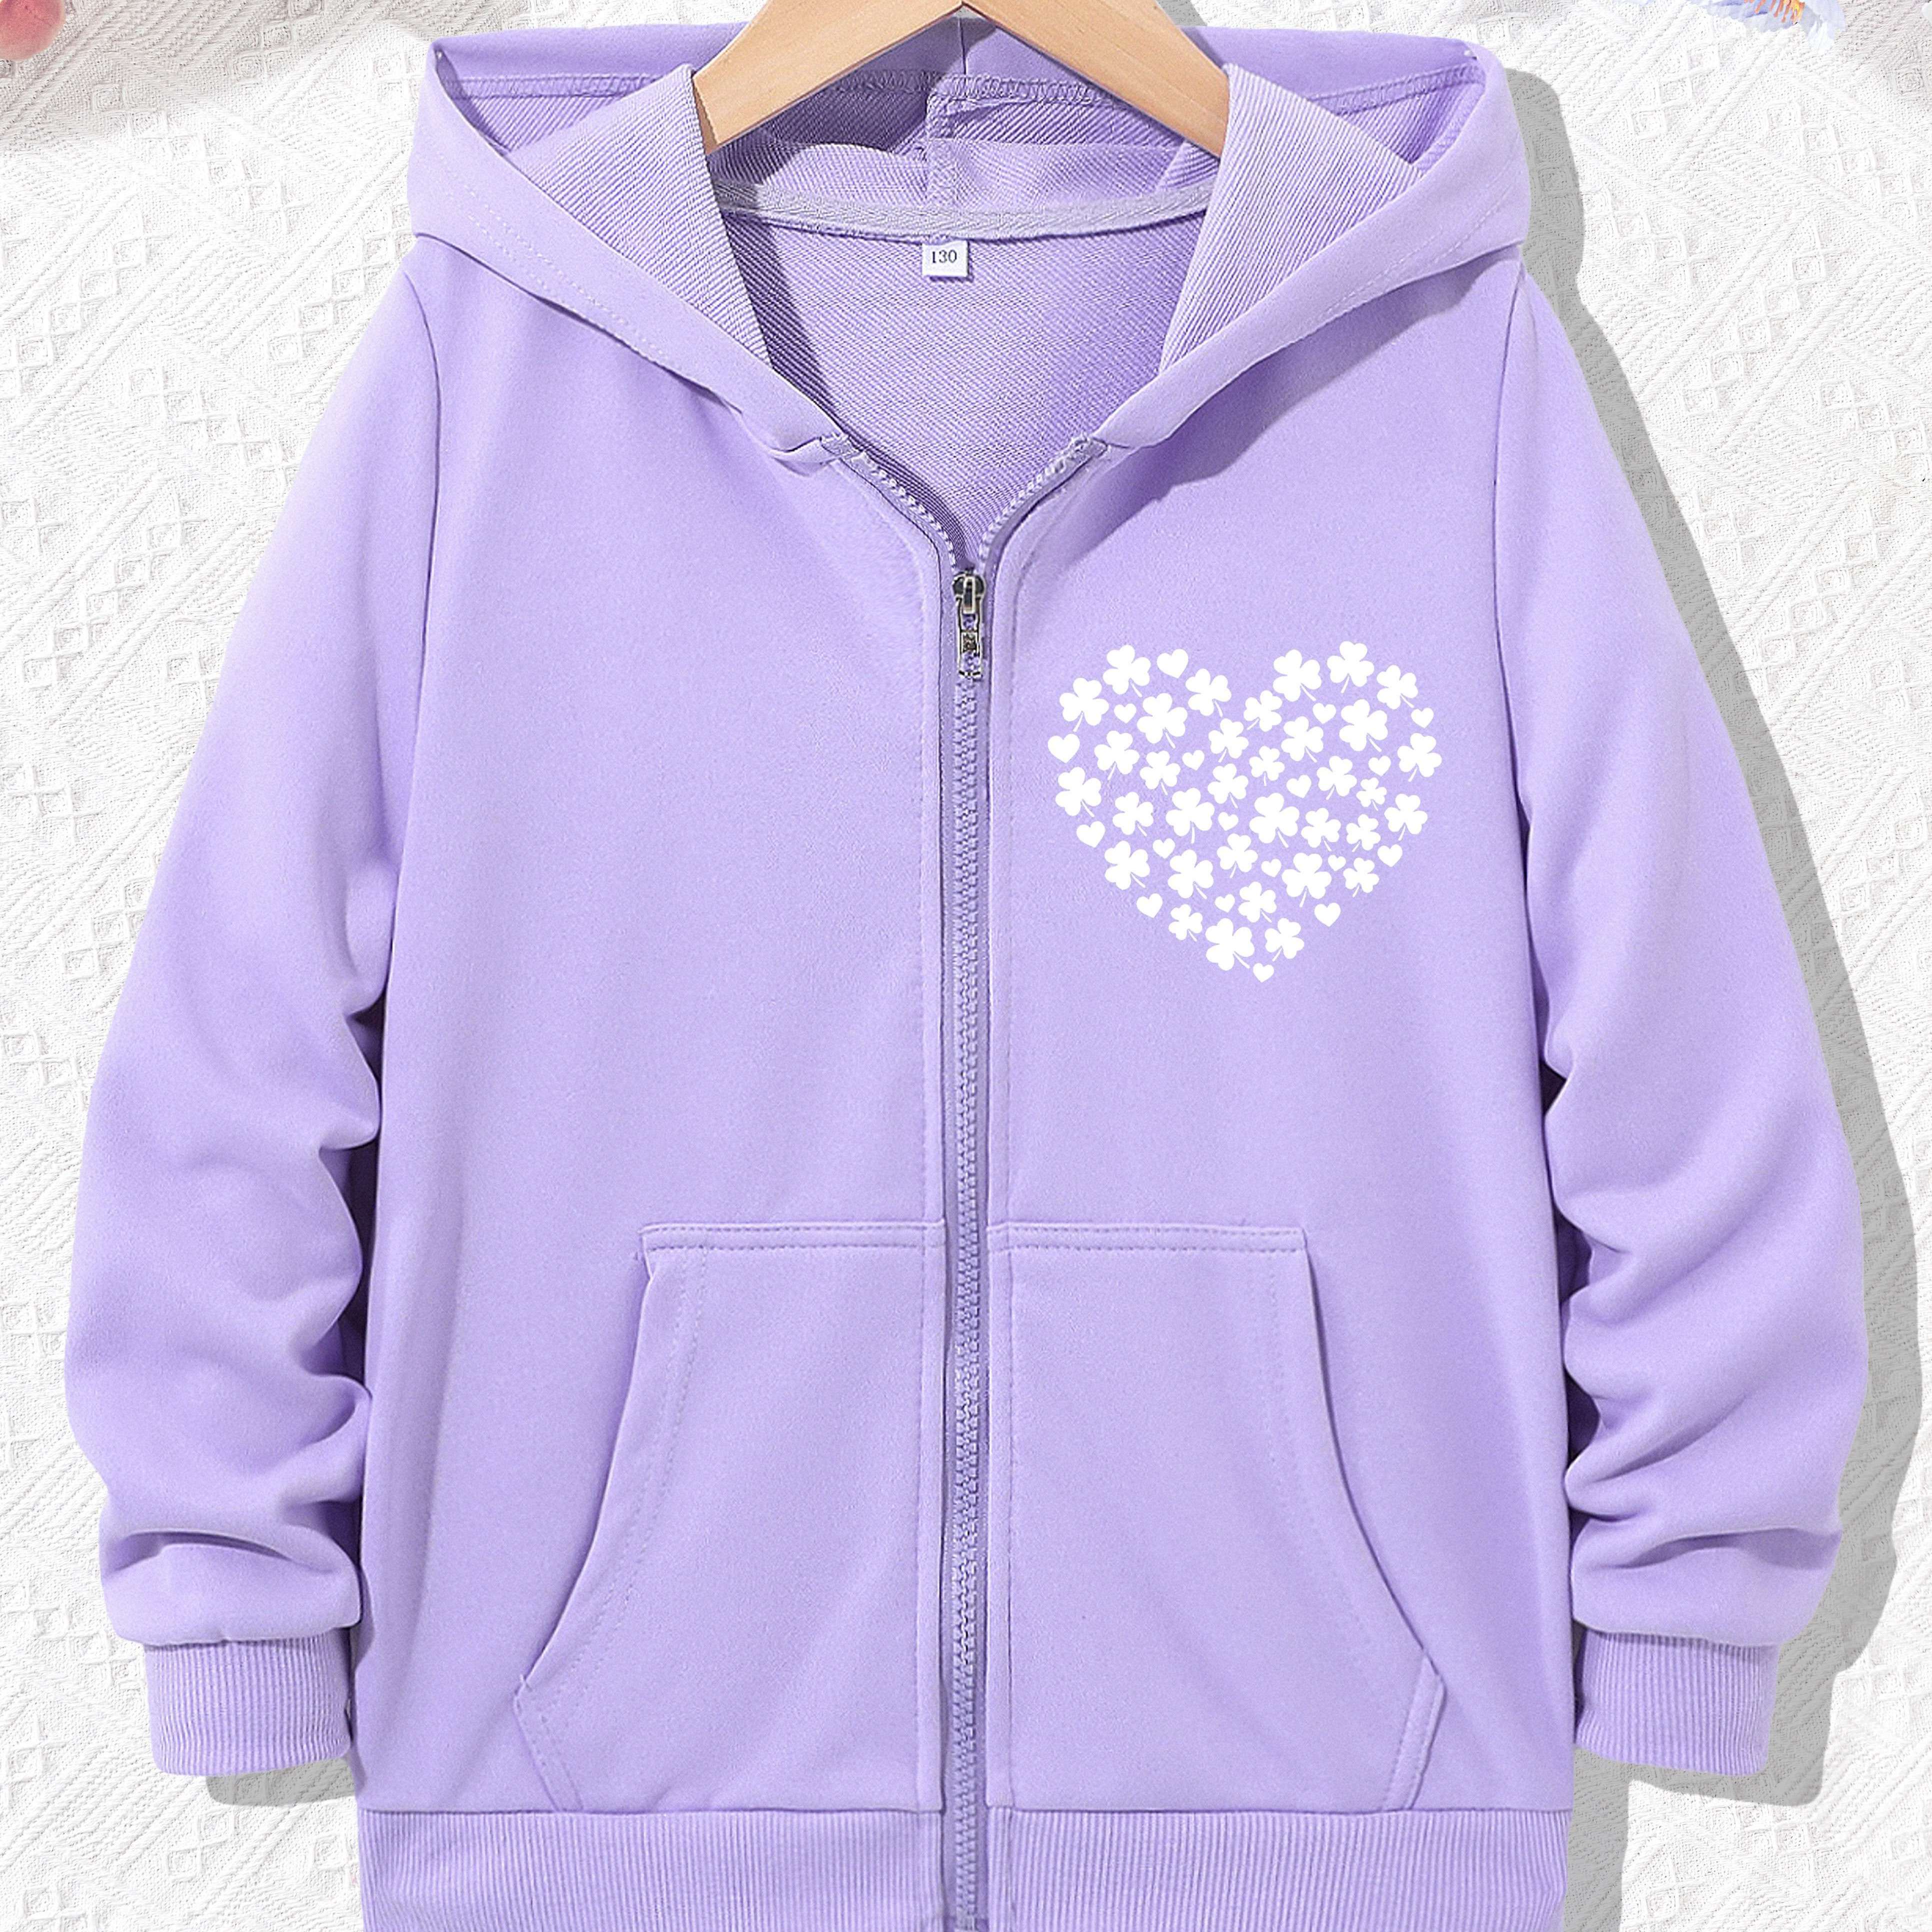 

Lucky Clovers Heart Print Girls Boys Zip-up Hoodie For St. Patrick's Day, Loose Fit Sports Hoodie Jacket With Pockets